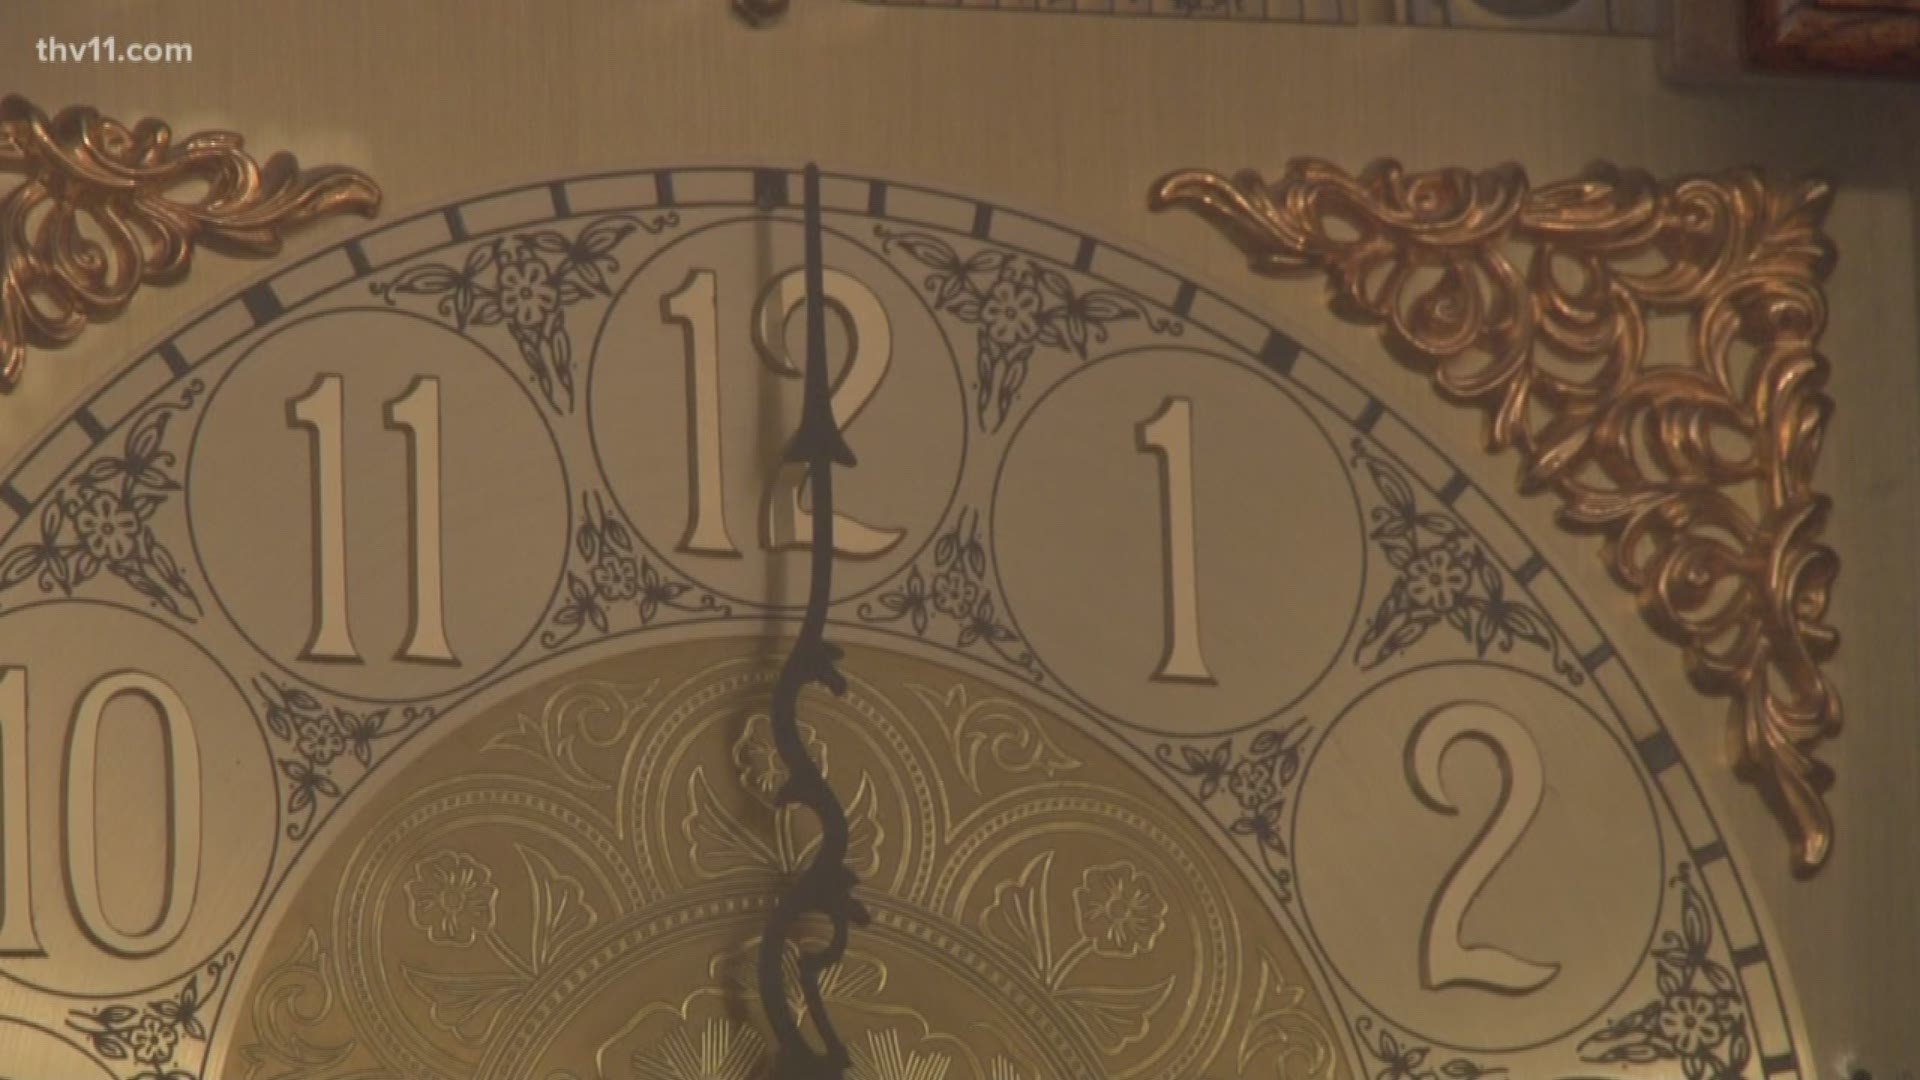 While we might only have one clock to set back, for one Little Rock couple, it's a project that will take them hours.